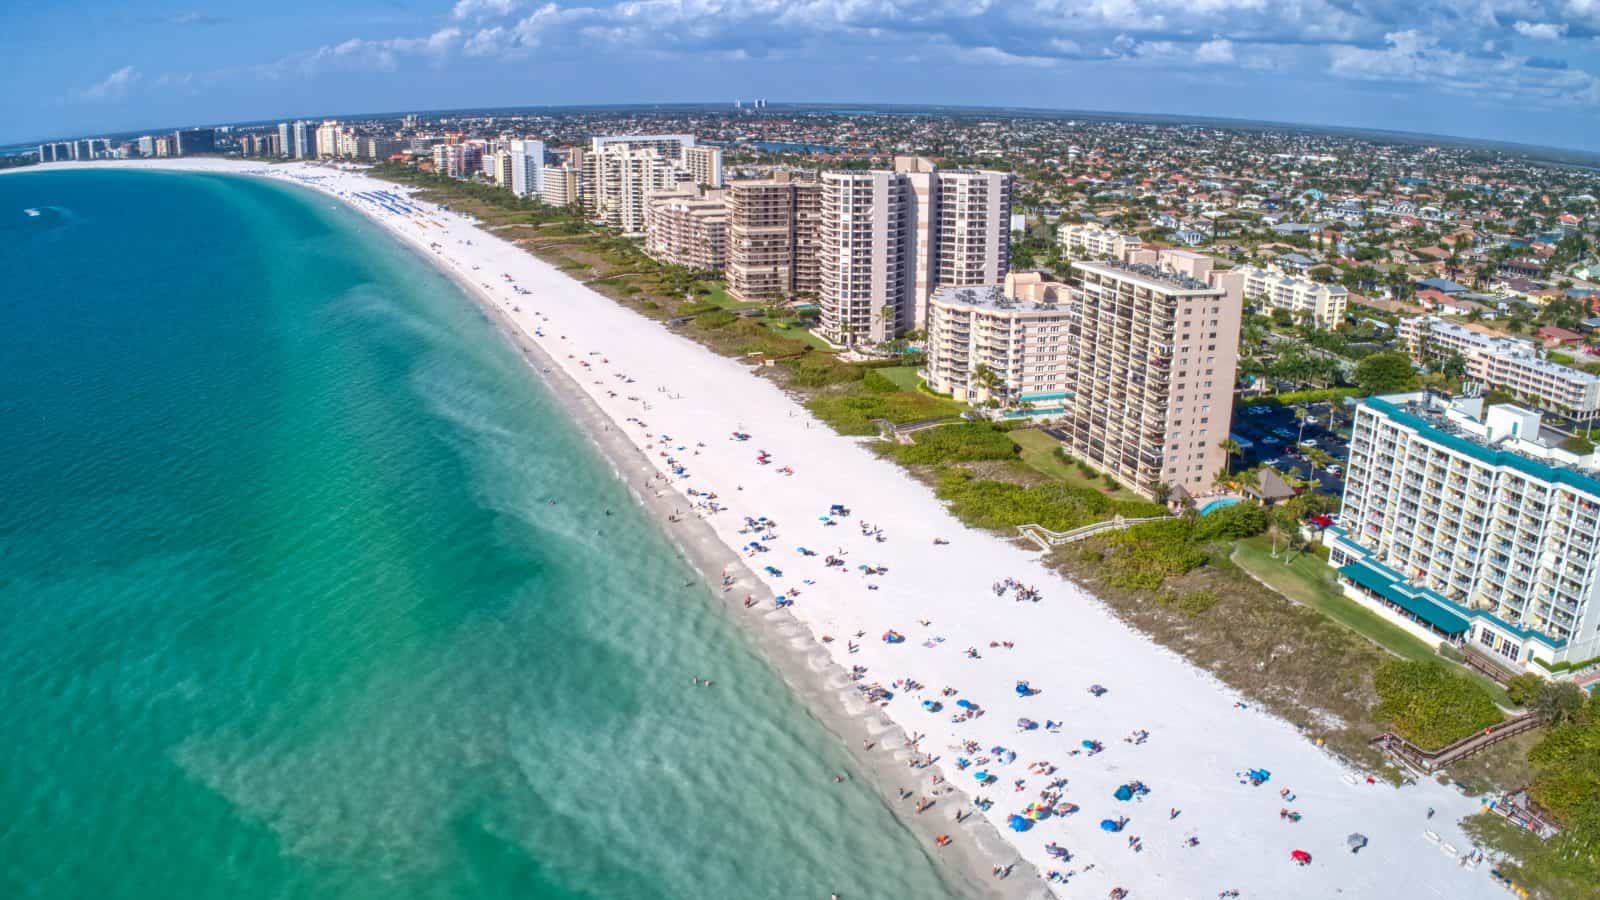 An aerial view of the best beach in Naples.